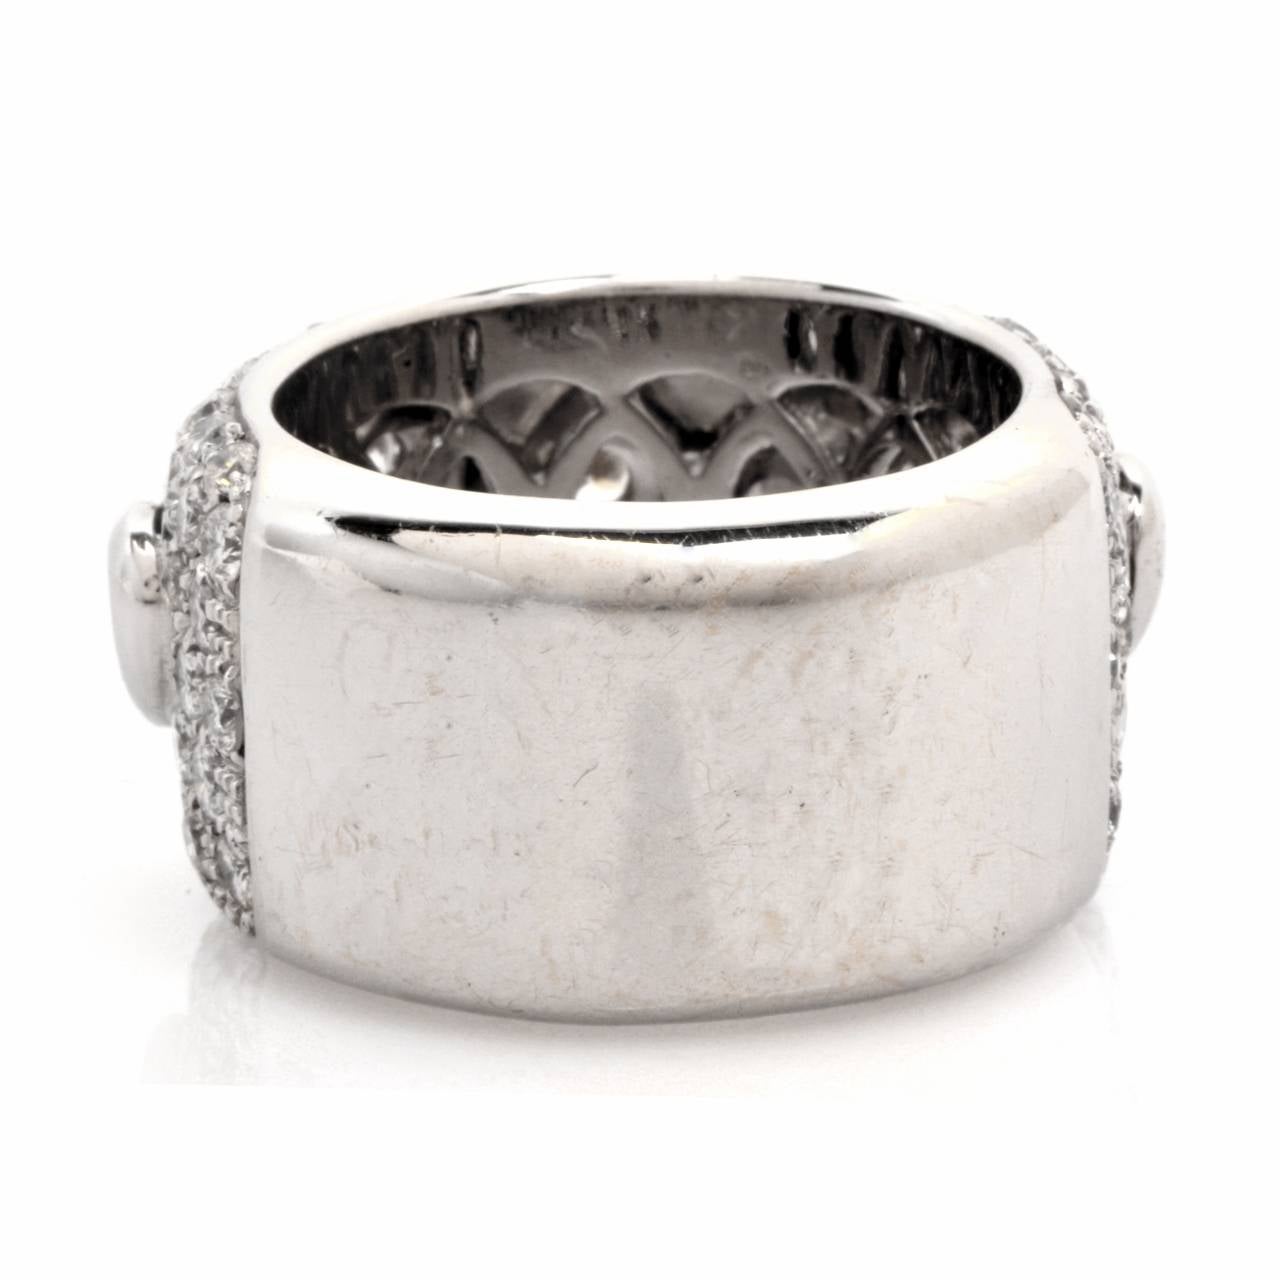 This affluent estate wide  band ring of elegant monochromatic aesthetic is of Italian provenance, crafted in solid 18K white gold, weighing 16.7 grams and measuring 13 mm wide. This alluring band ring is enriched with 158 pave-set round faceted